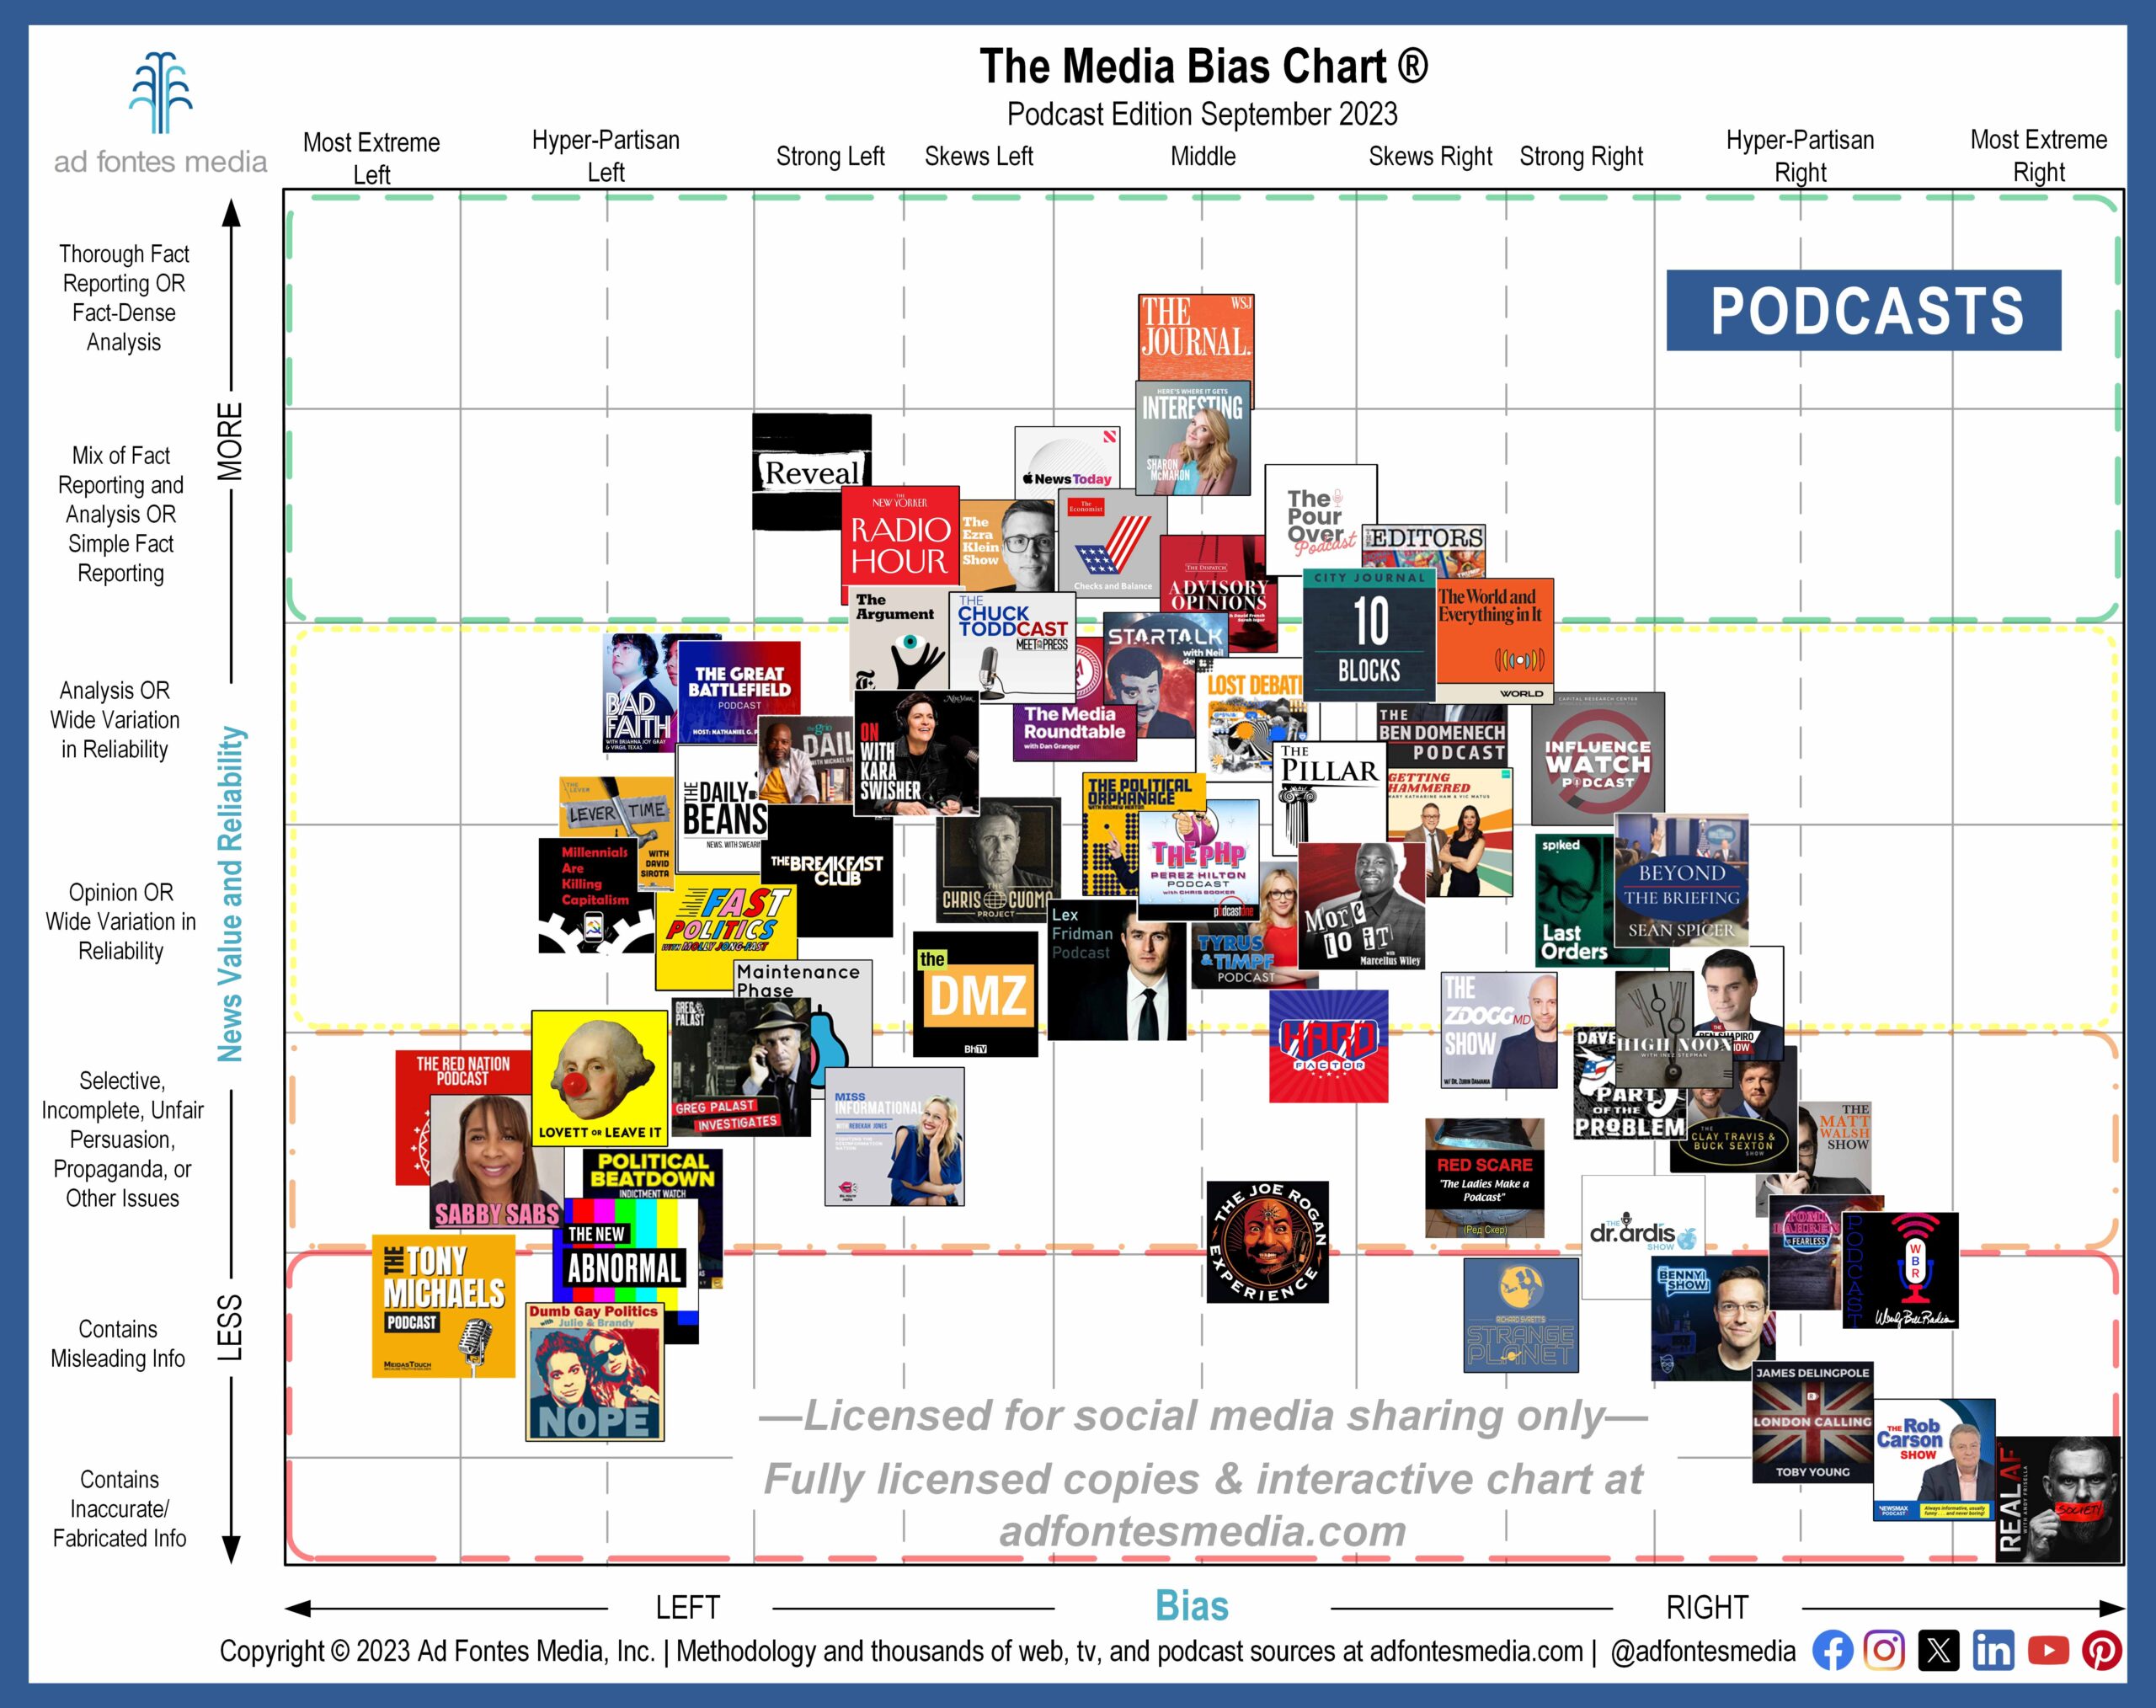 Explore 10 New Podcasts Making Their Debut on the September Static Media Bias Chart